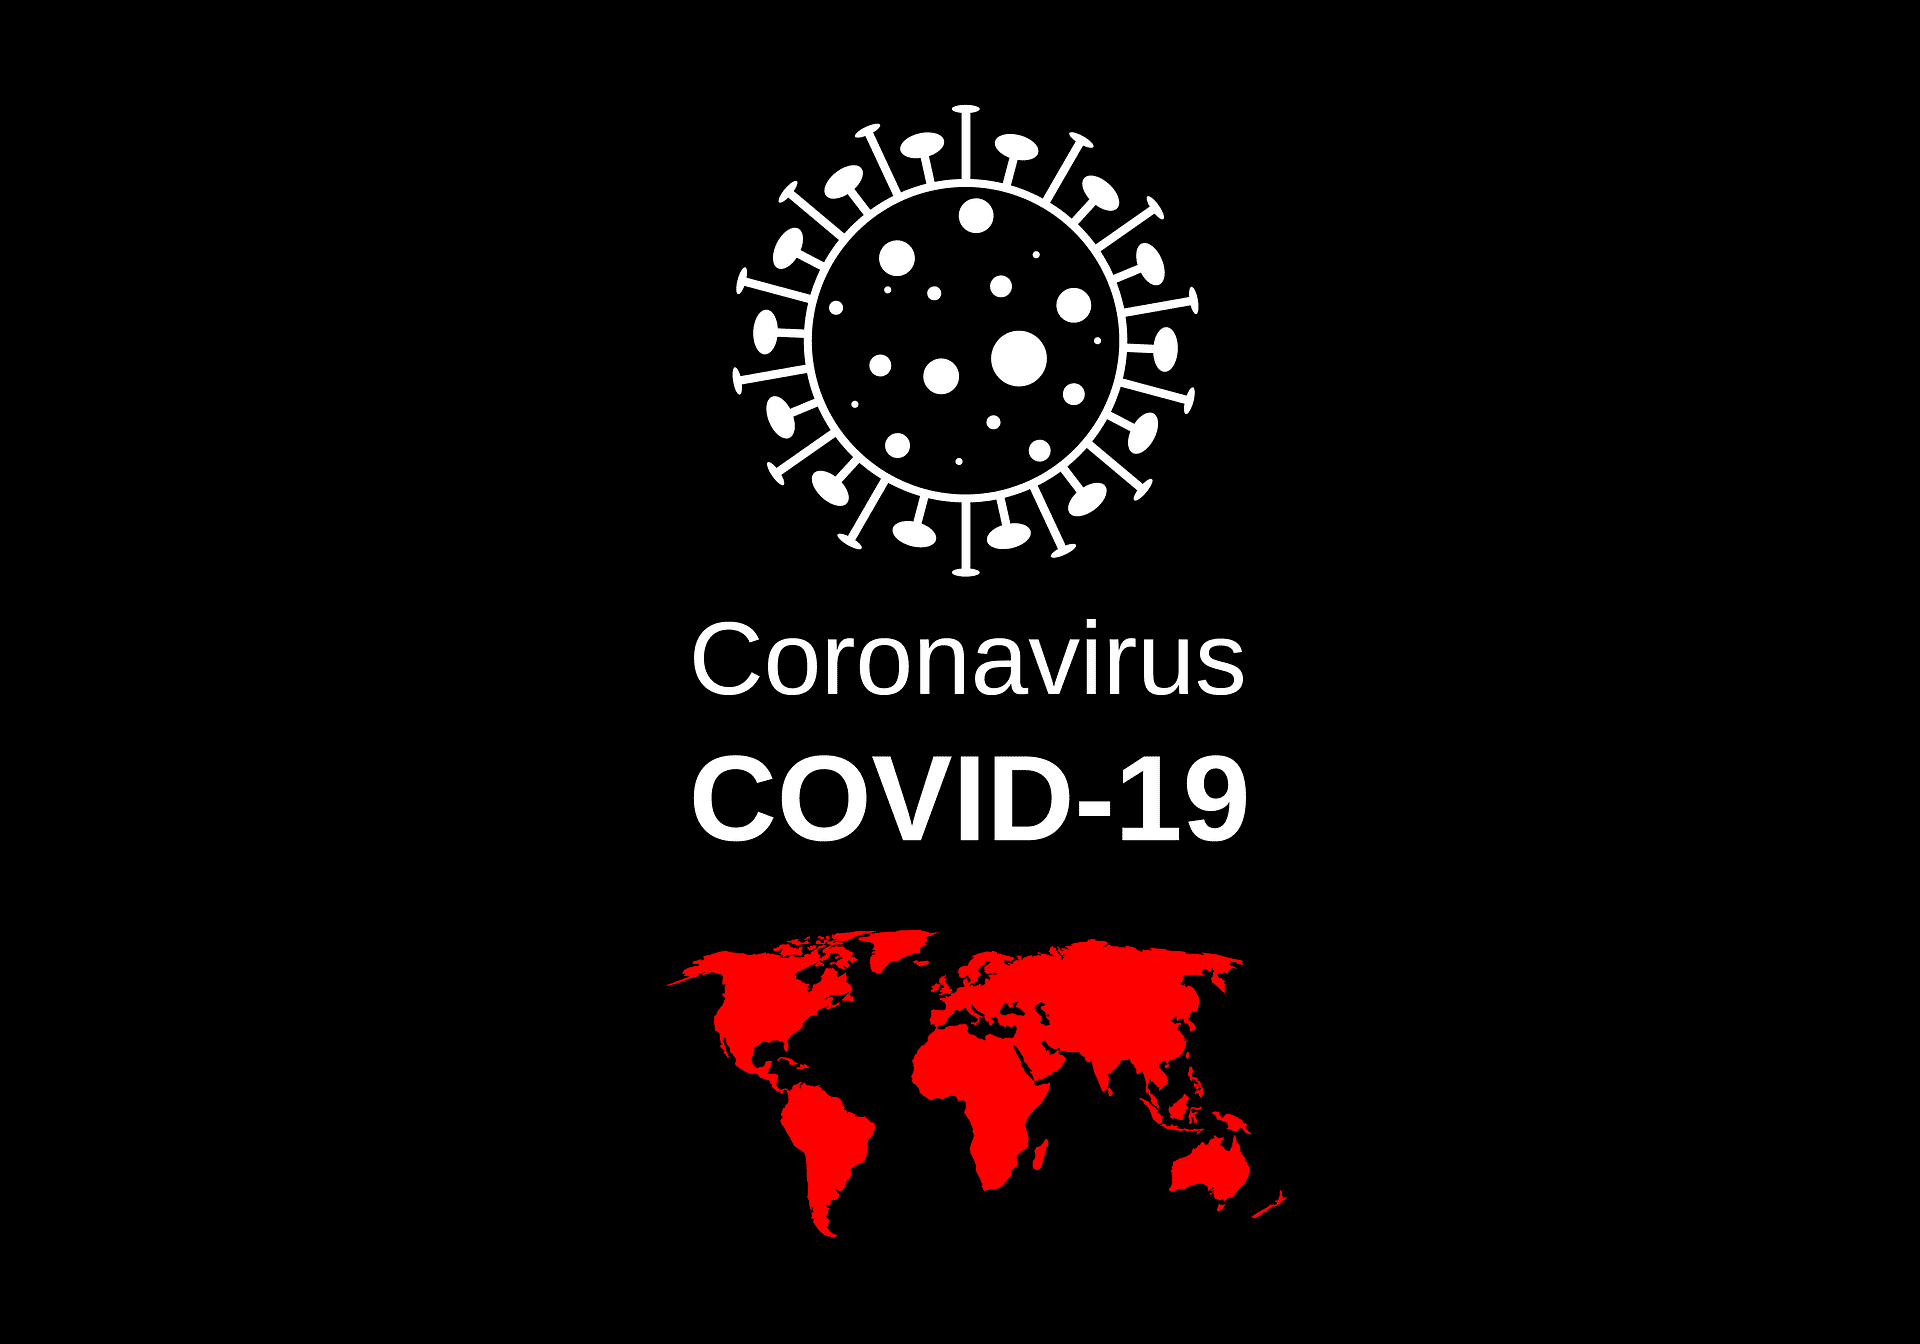 The COVID-19 MSP Resource Page image